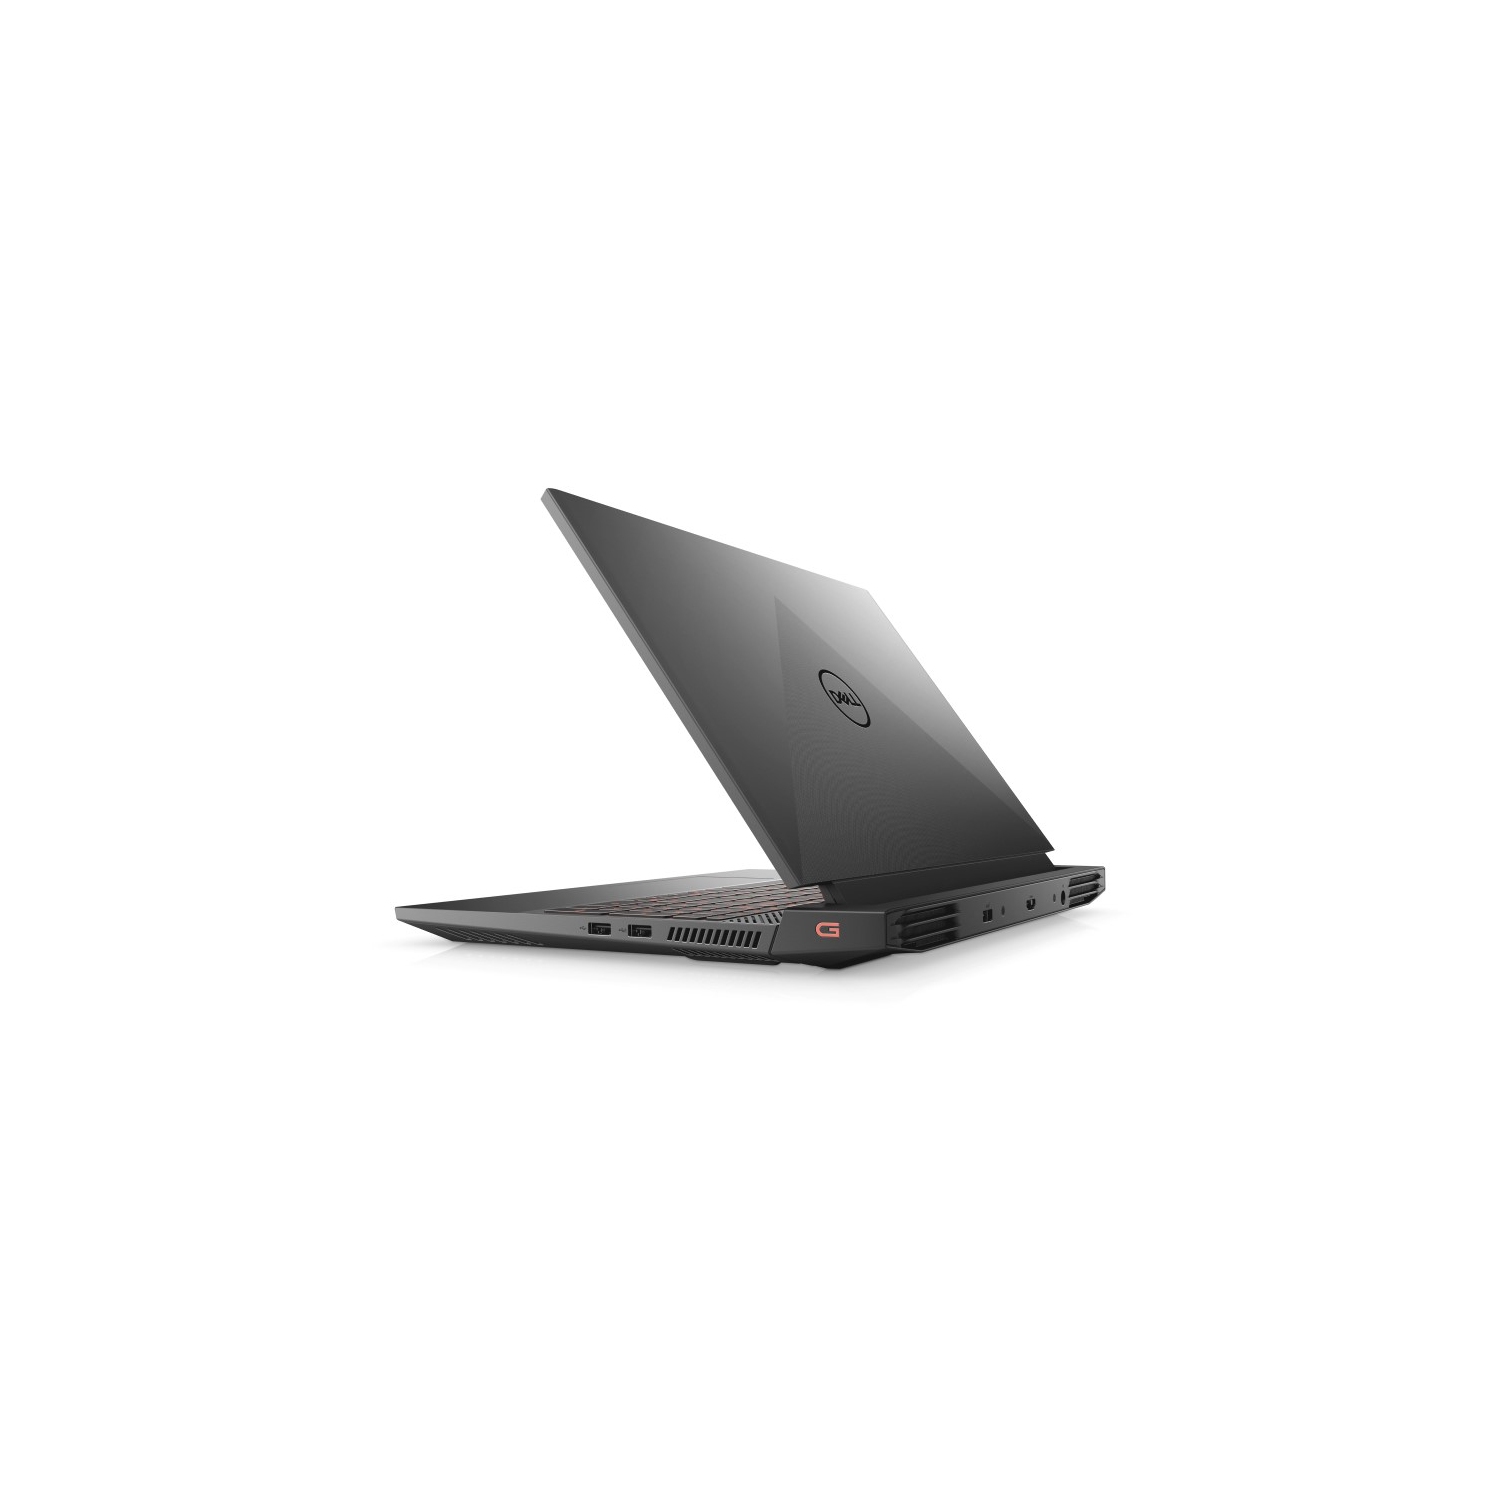 Refurbished (Excellent) - Dell G15 5511 (Gaming) Laptop 15" - Nvidia RTX 3060 - Intel i7-11800H - 16GB RAM - 1TB SSD - WIN 11 Home - Certified Refurbished